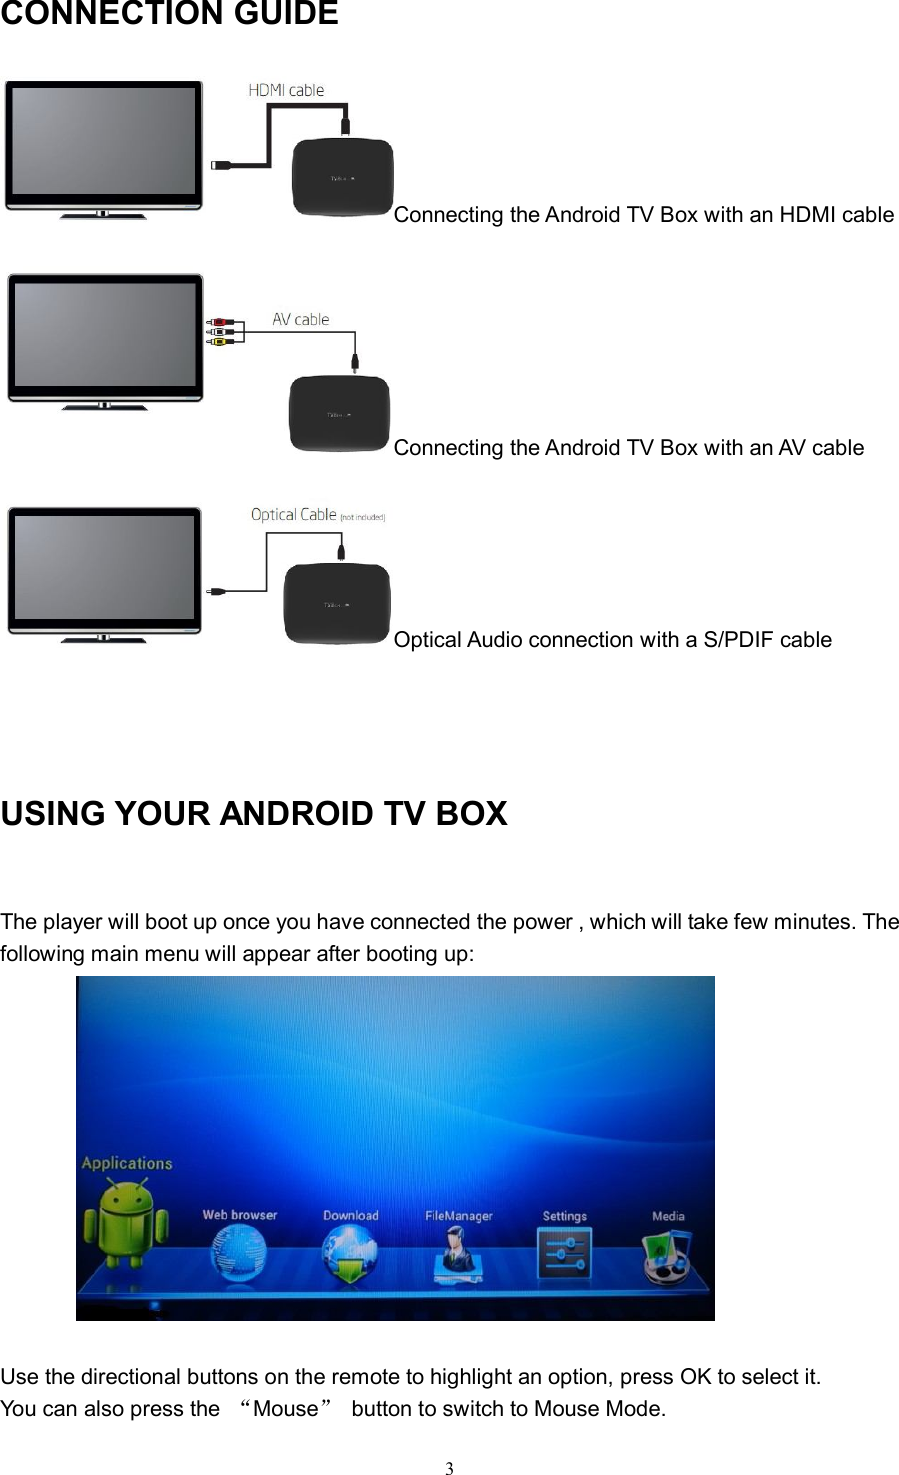   3CONNECTION GUIDE Connecting the Android TV Box with an HDMI cable  Connecting the Android TV Box with an AV cable  Optical Audio connection with a S/PDIF cable    USING YOUR ANDROID TV BOX  The player will boot up once you have connected the power , which will take few minutes. The following main menu will appear after booting up:   Use the directional buttons on the remote to highlight an option, press OK to select it.     You can also press the  “Mouse”  button to switch to Mouse Mode. 